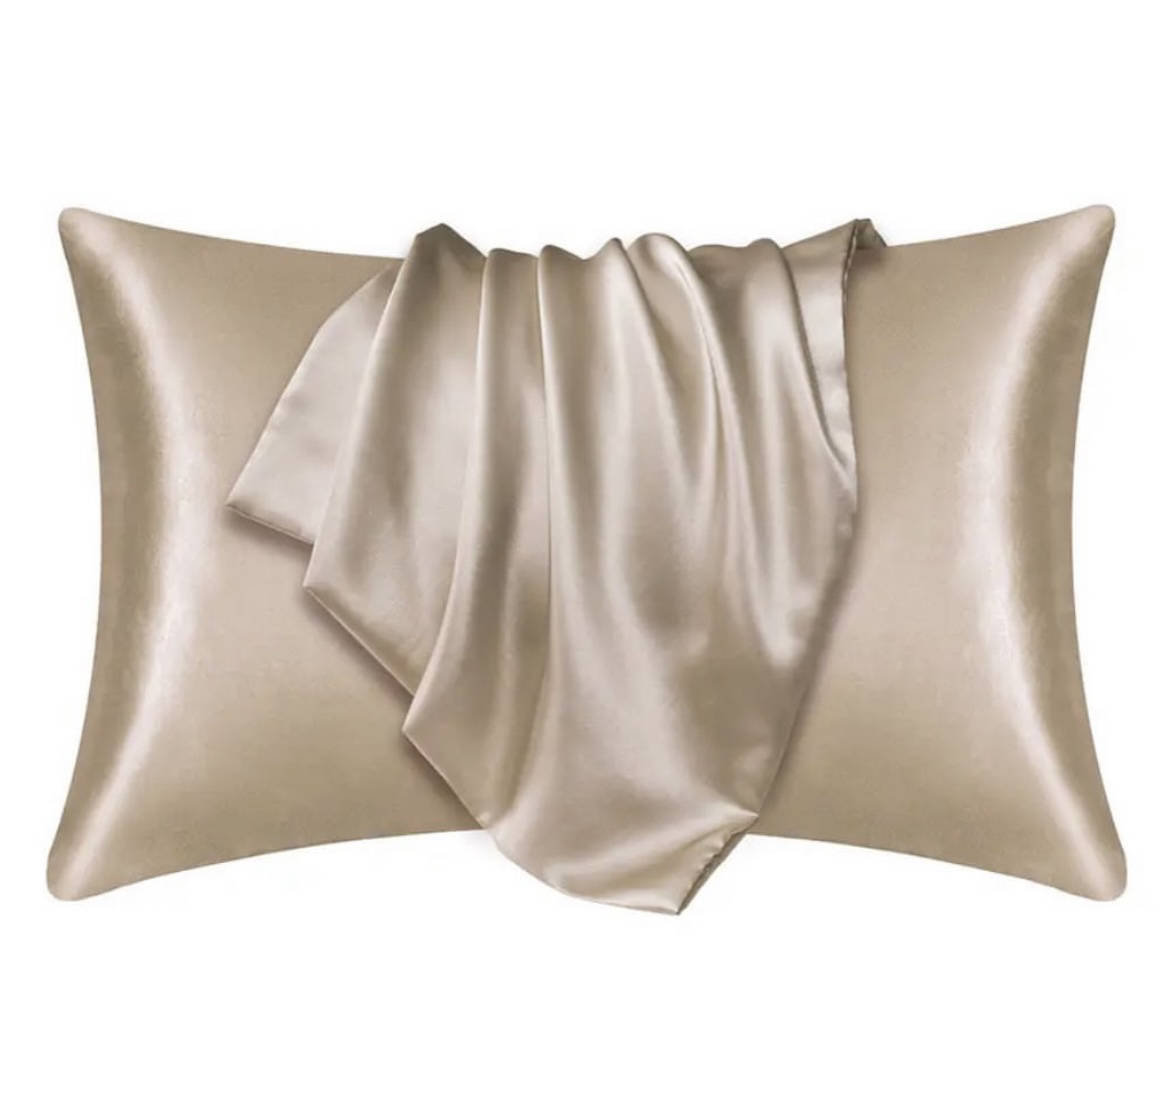 100% pure silk mulberry pillow case